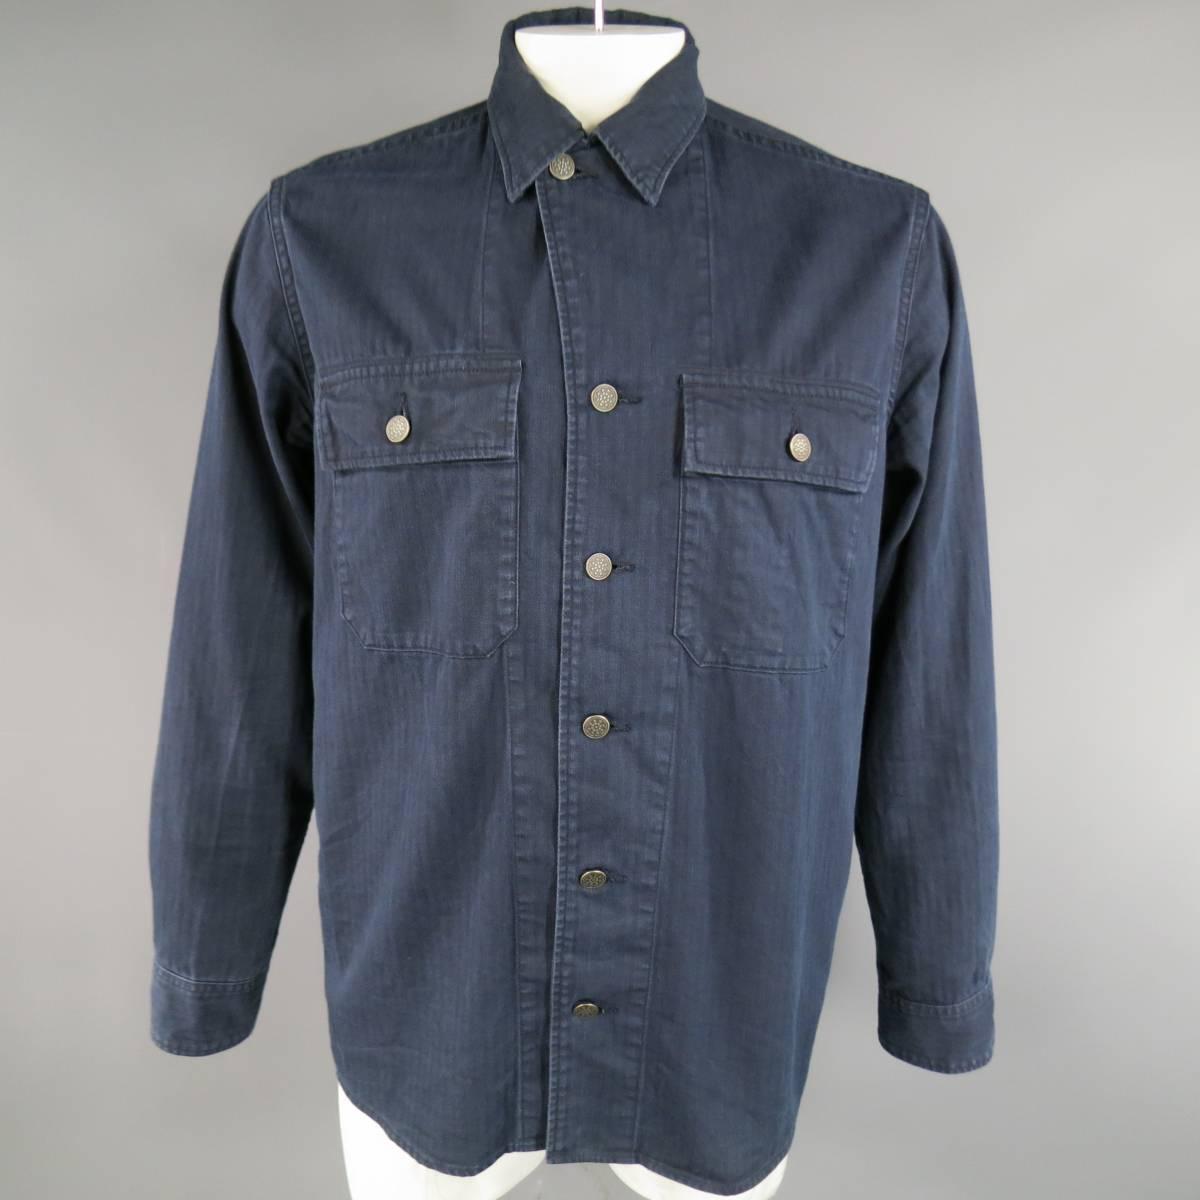 VISVIM Long Sleeve Shirt consists of 100% cotton material in a indigo color tone. Designed in a shirt jacket style, button up front with patch pocket closure. Detailed with single button cuff. New with tags.
Retails at $680.00.

New with Tags
Marked